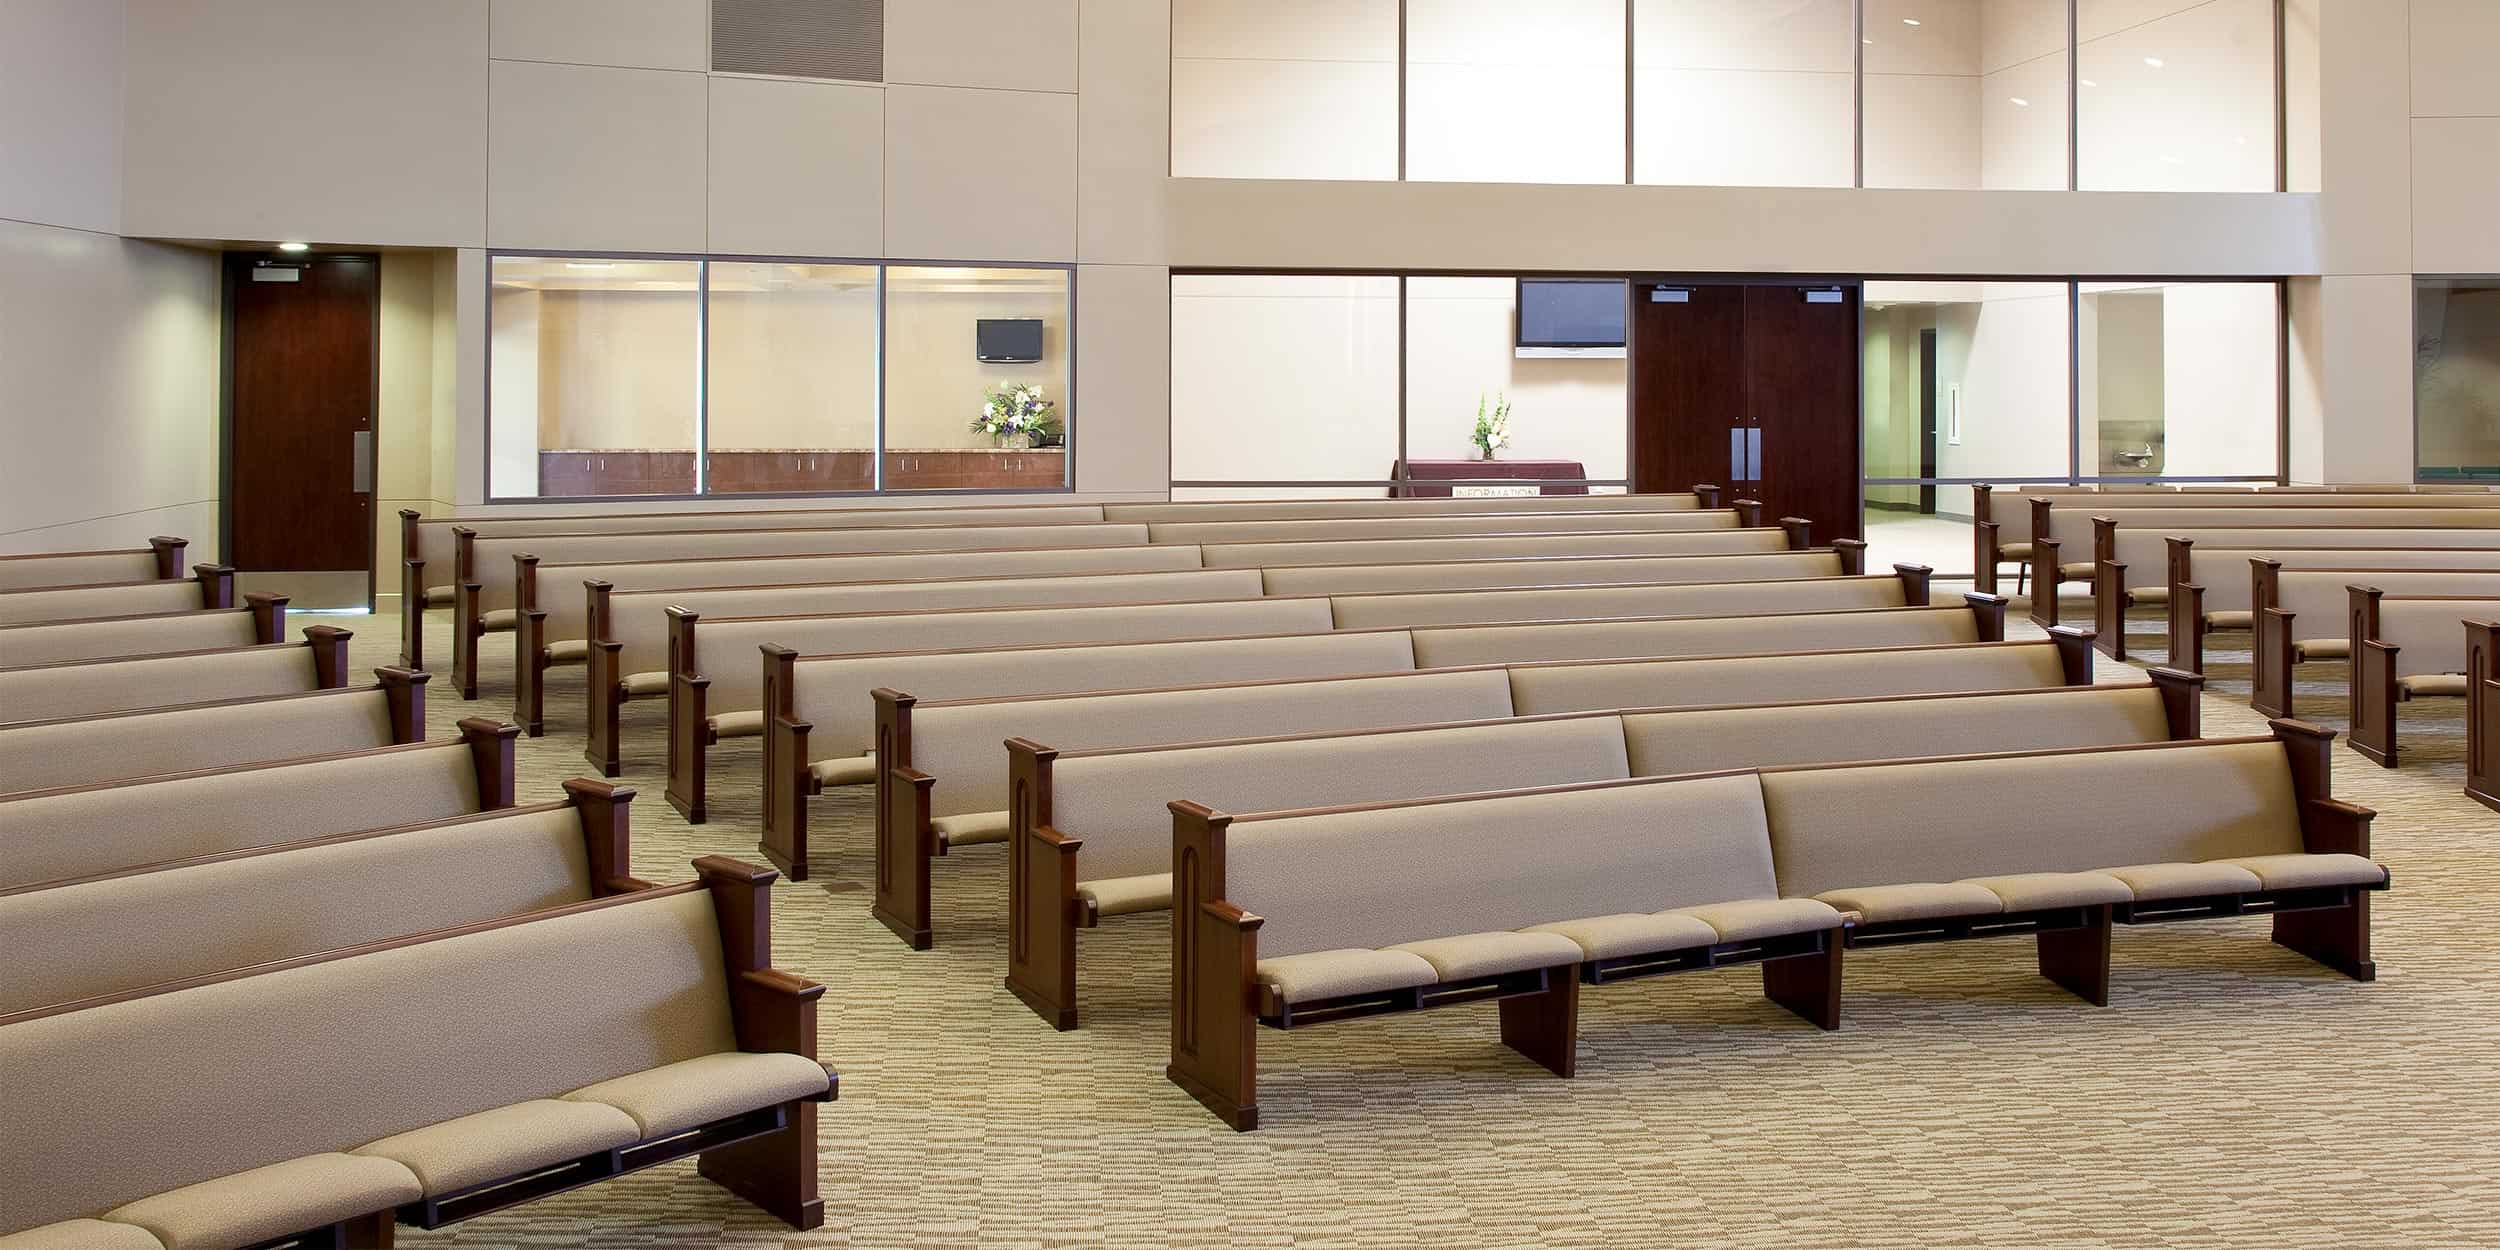 Mitered Pews with Arm Rest Pew Ends, Underseat Bookracks and, Individual Definity Seats made by Sauder Worship Seating